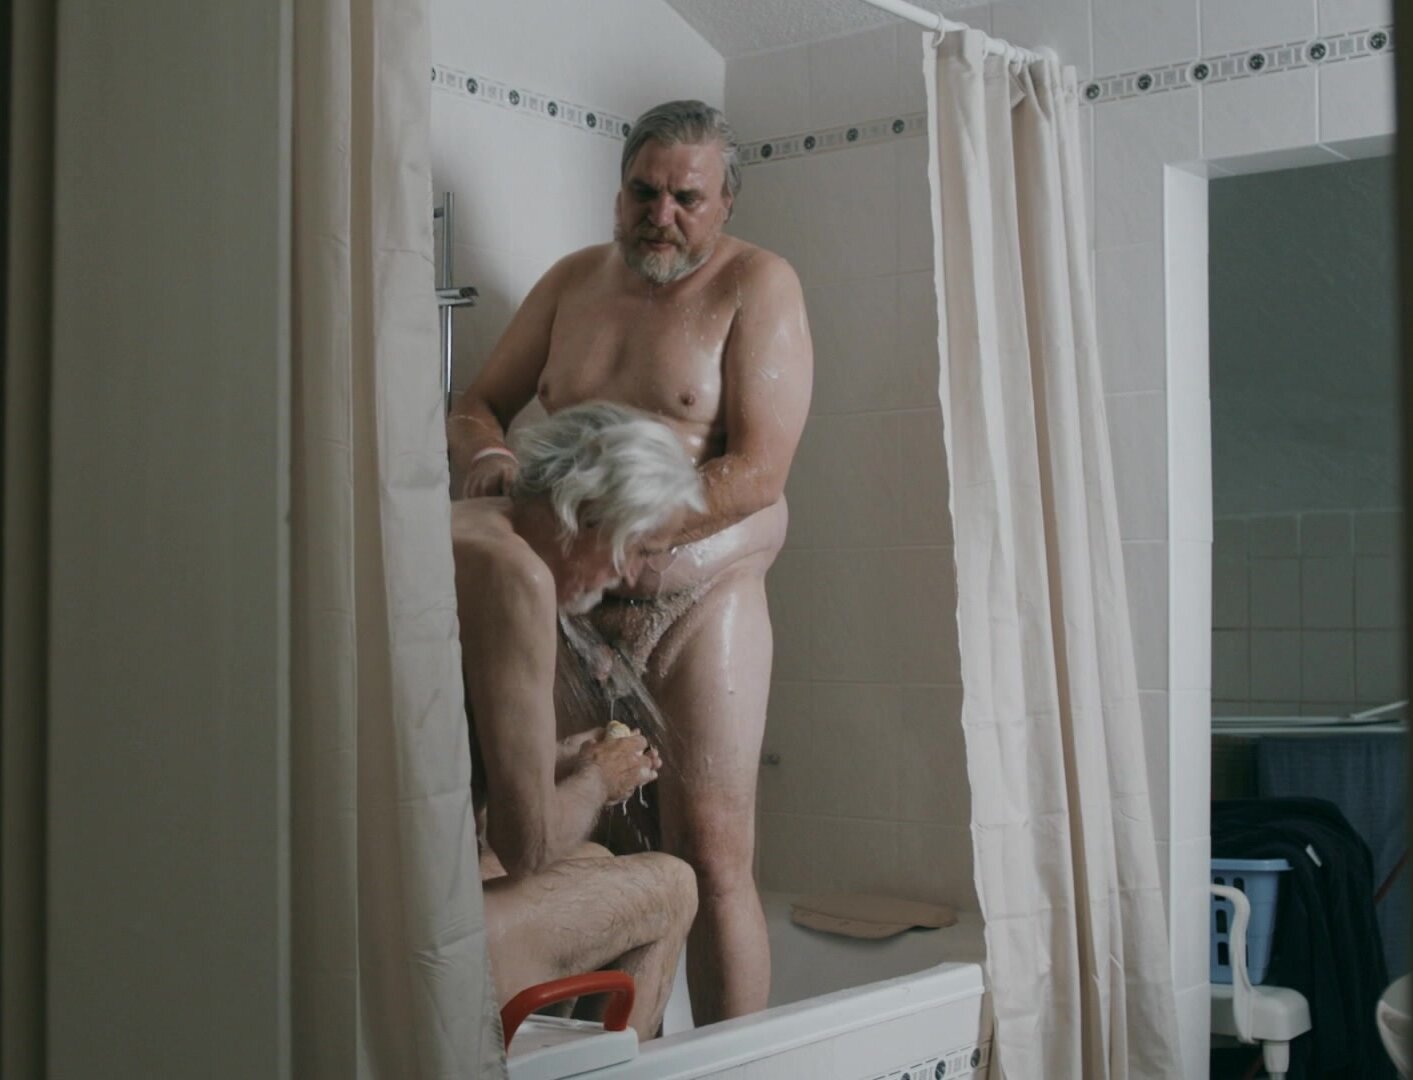 Big guy taking shower along with his RL dad in film